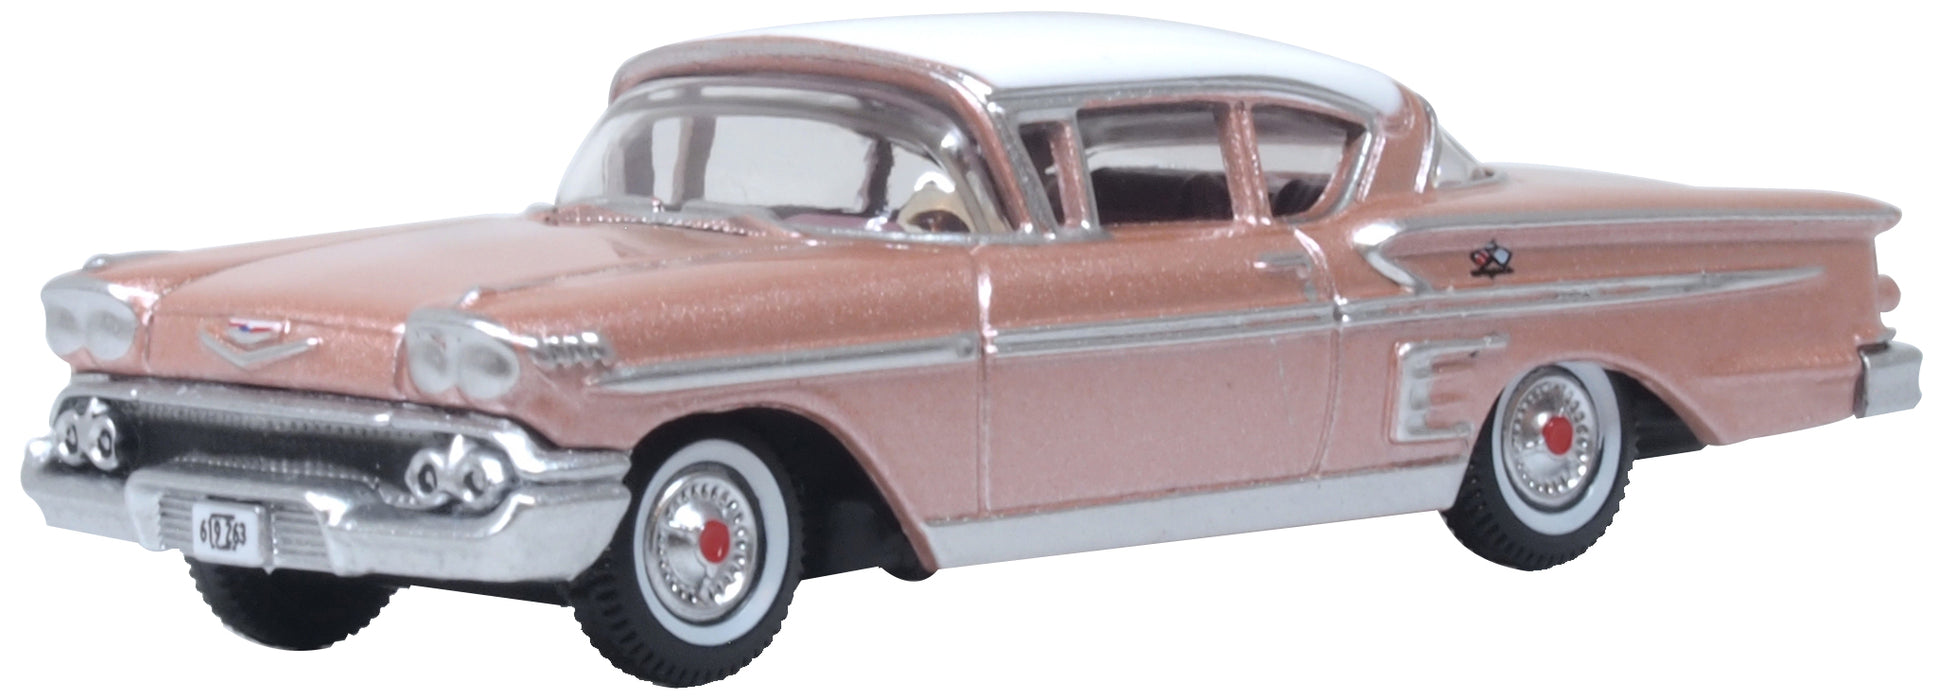 Oxford Diecast Chevrolet Impala Sport Coupe 1958 Cay Coral and White 1:87 scale